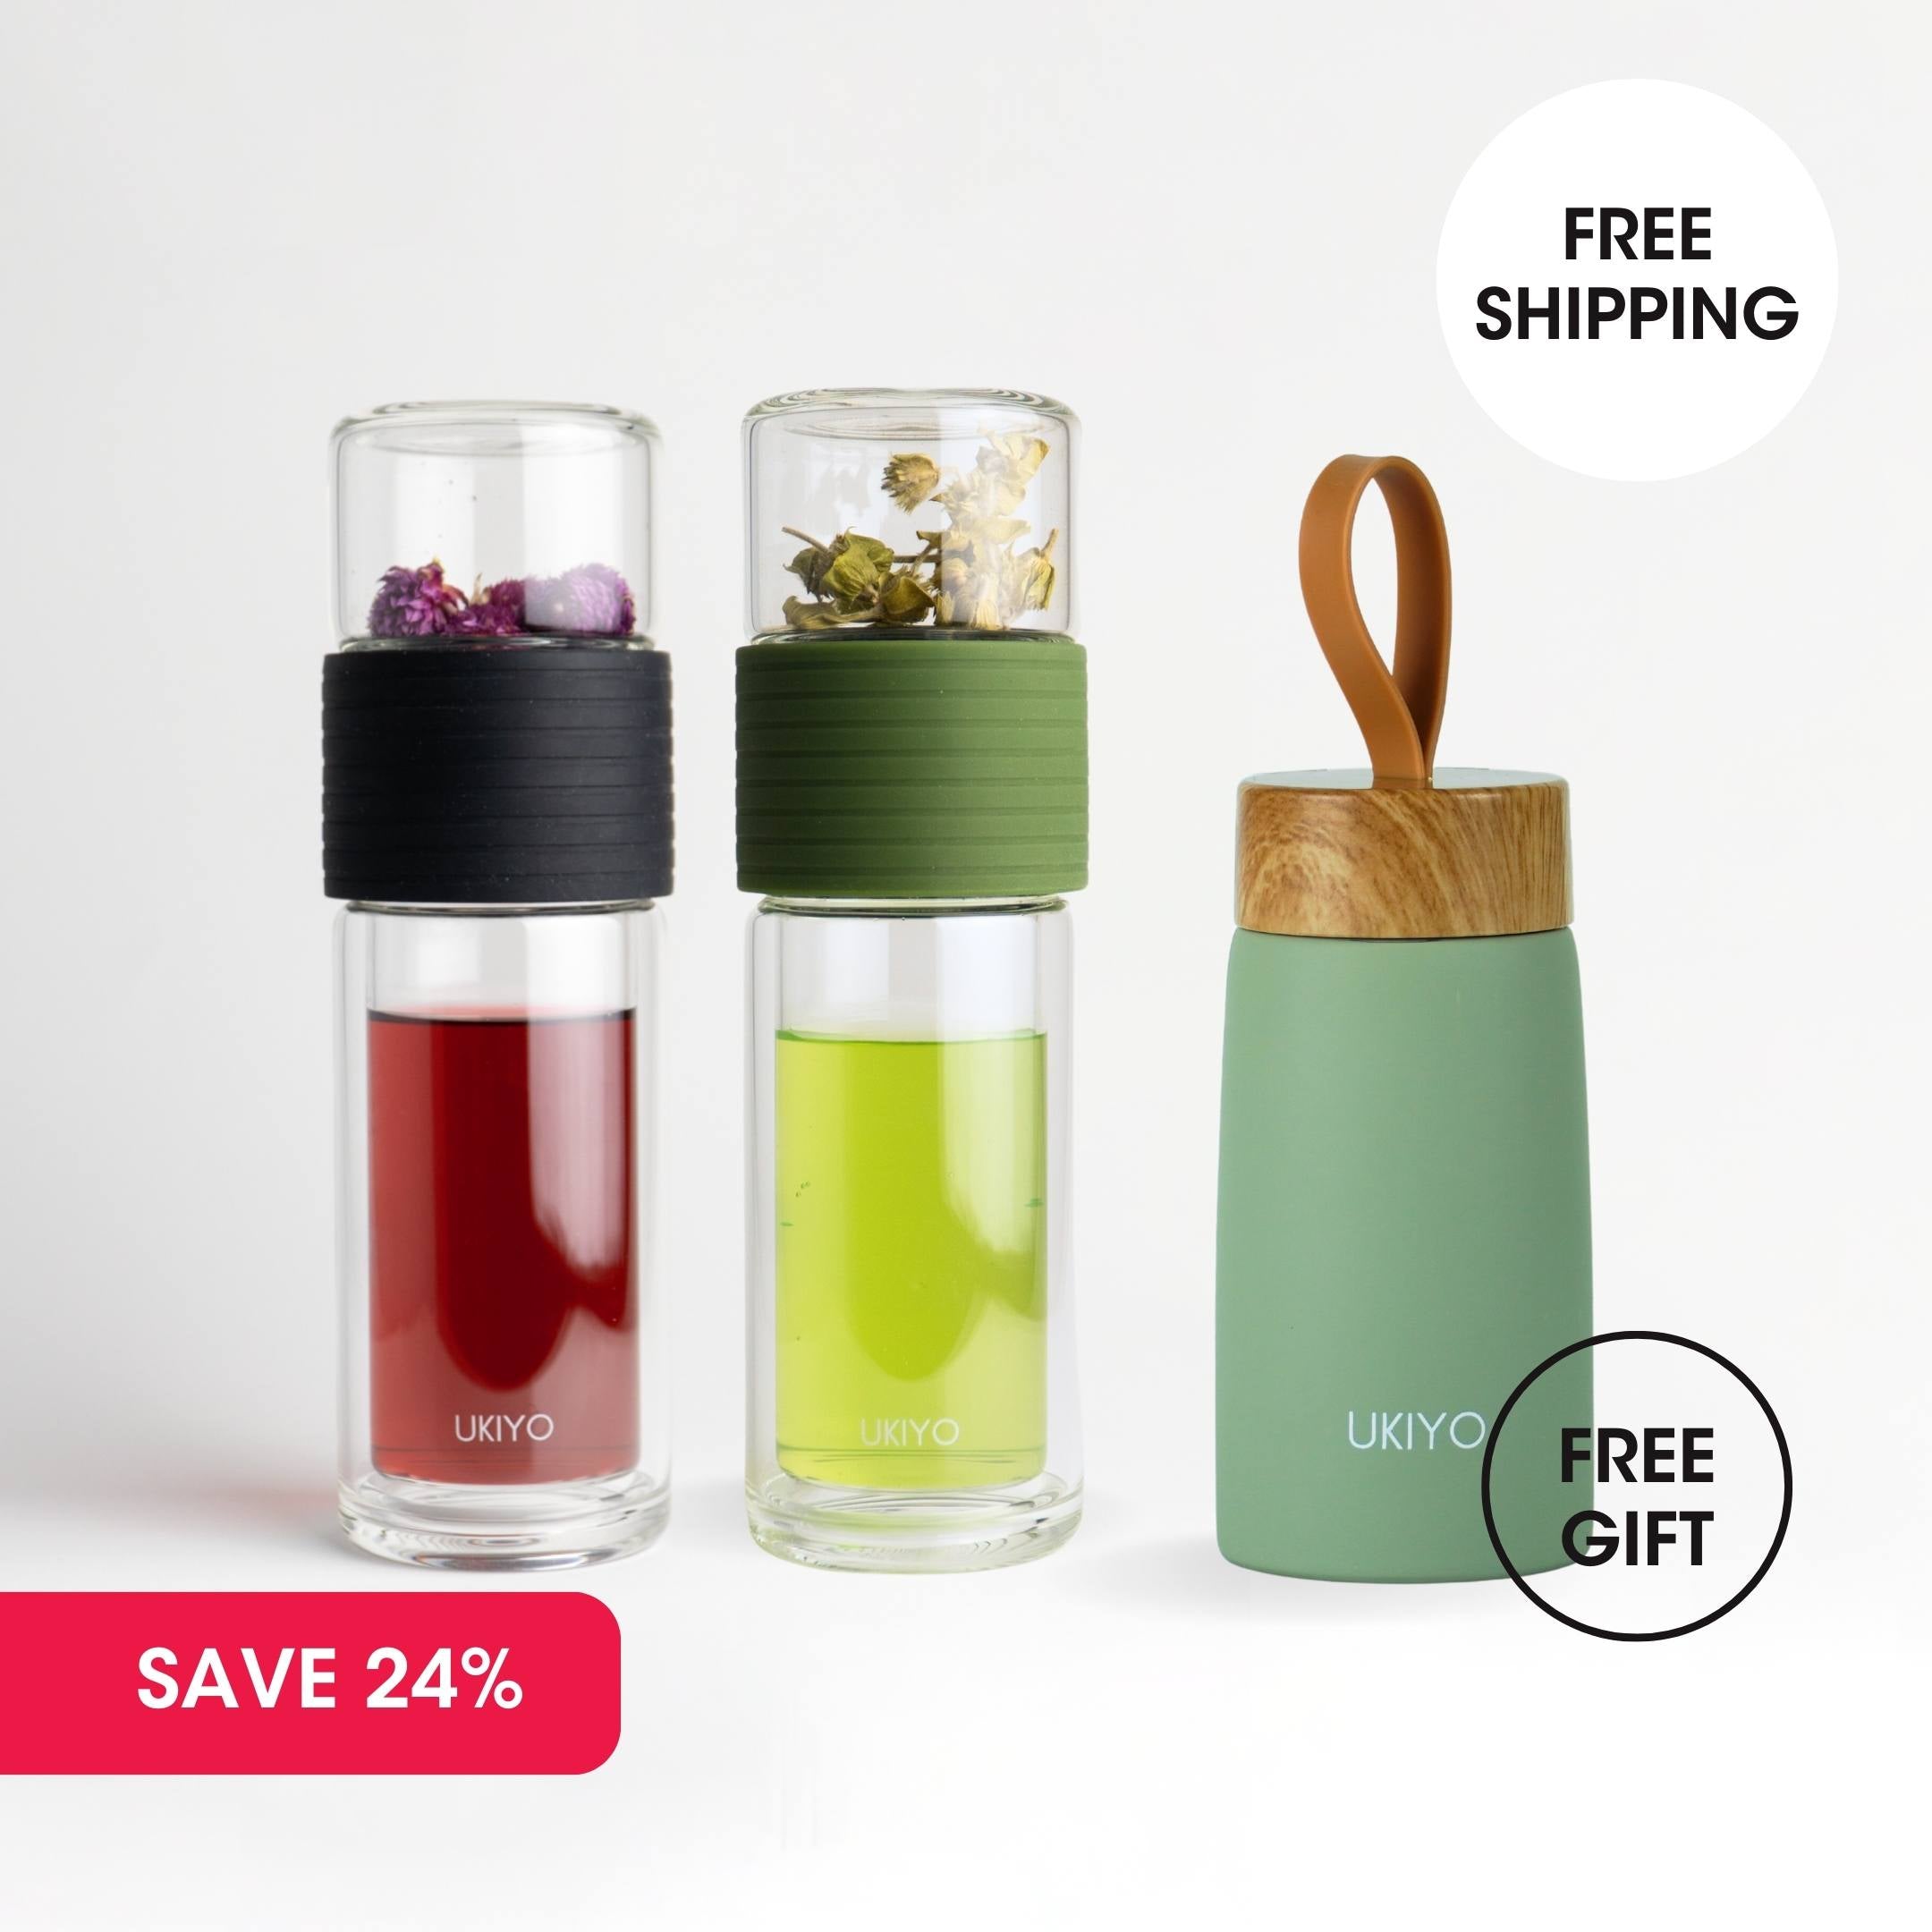 Double Up Promo Pack - 2 Premium Infusers & FREE Joki Humidifier